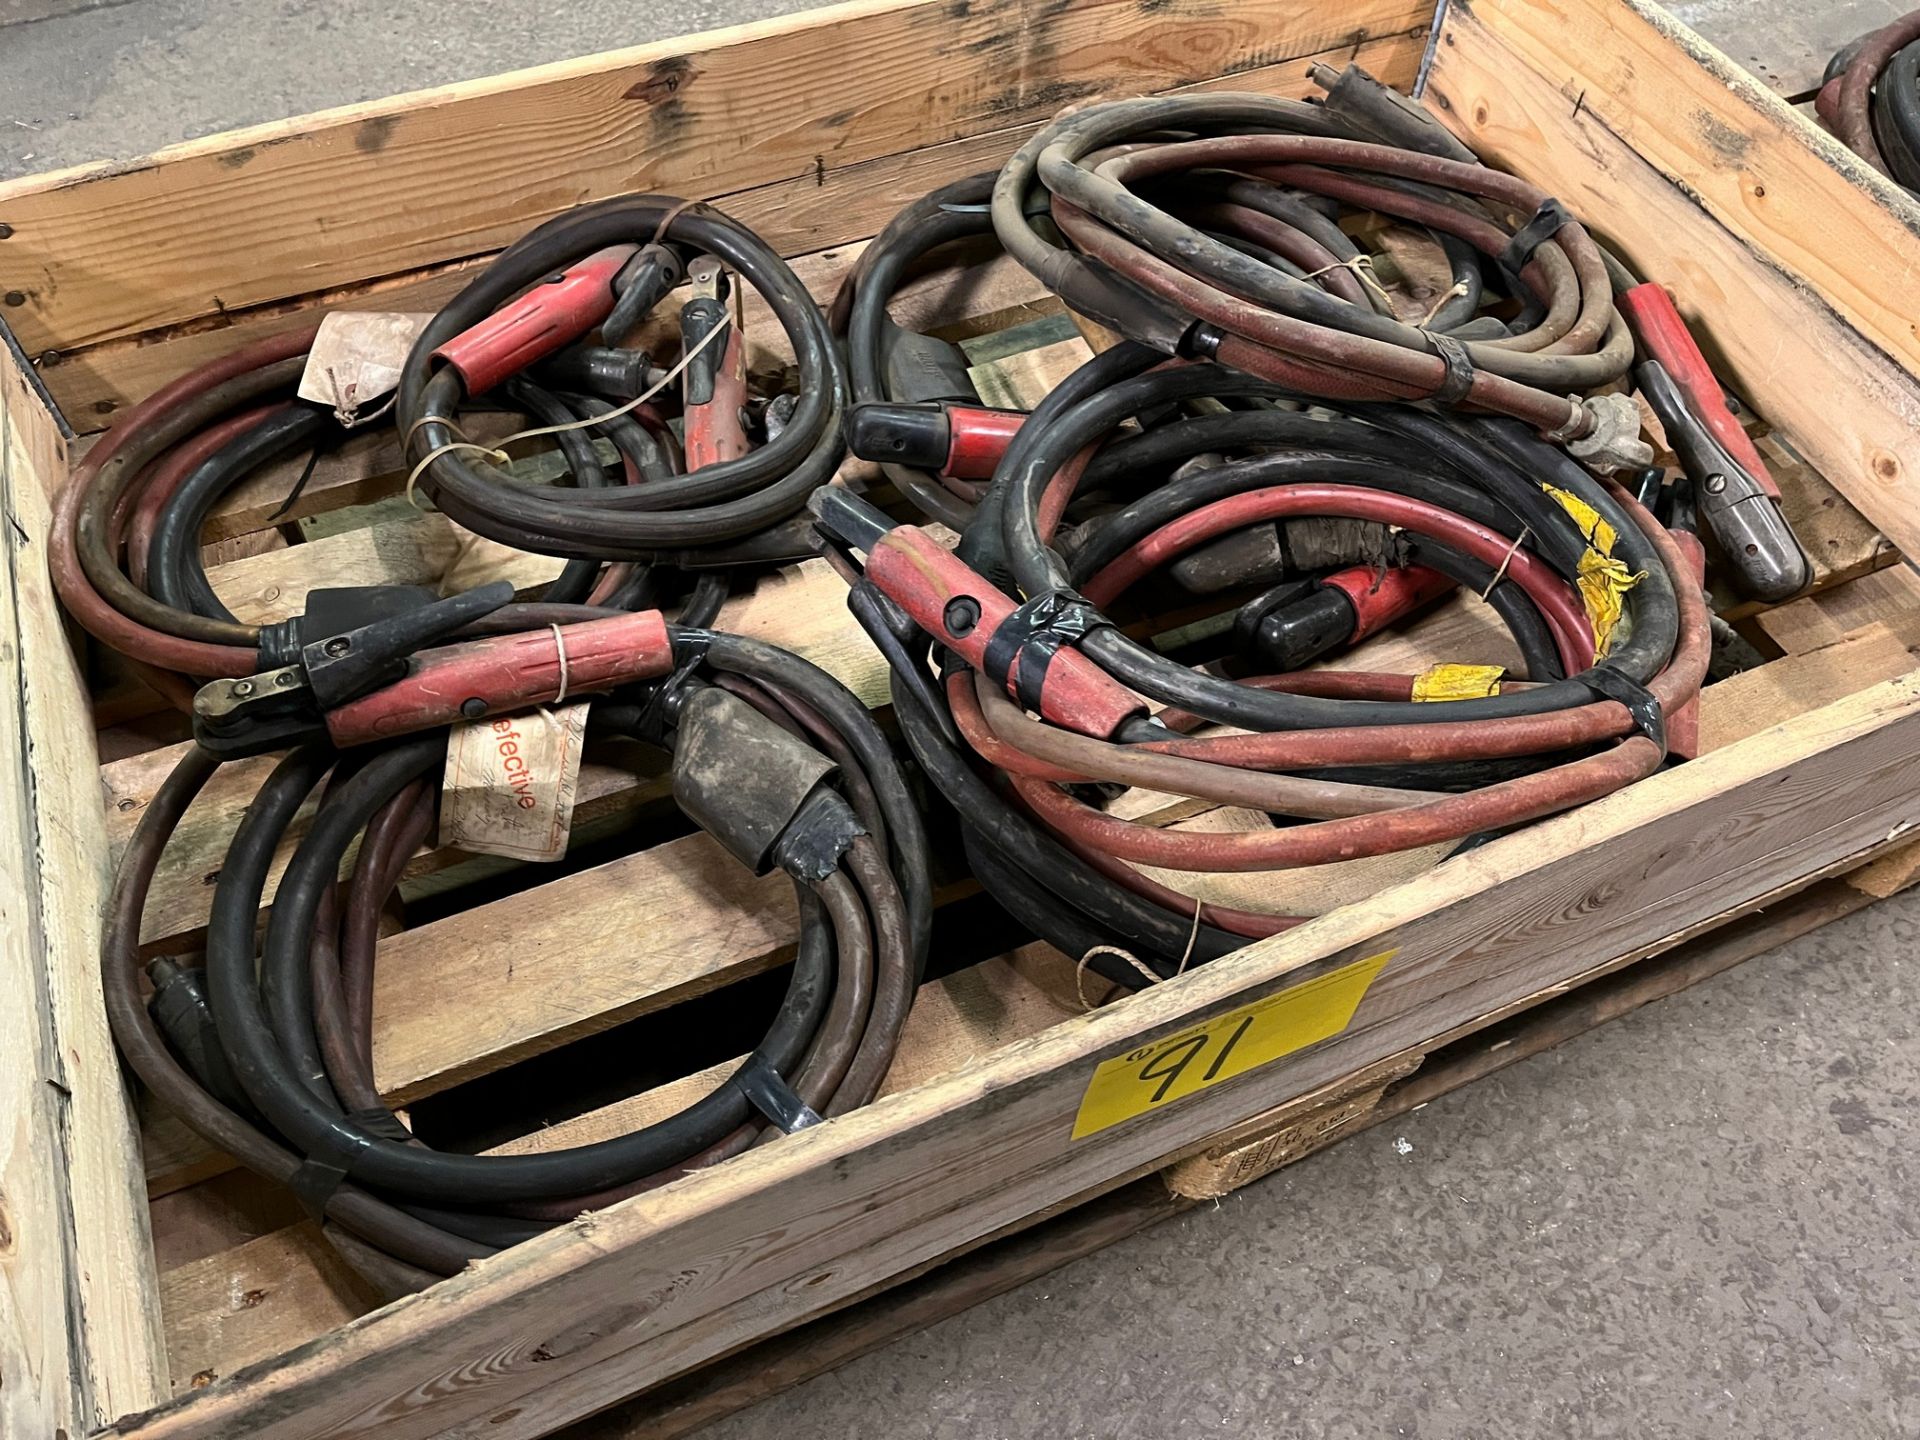 LOT OF (8) GROUNDING CABLES IN CRATE